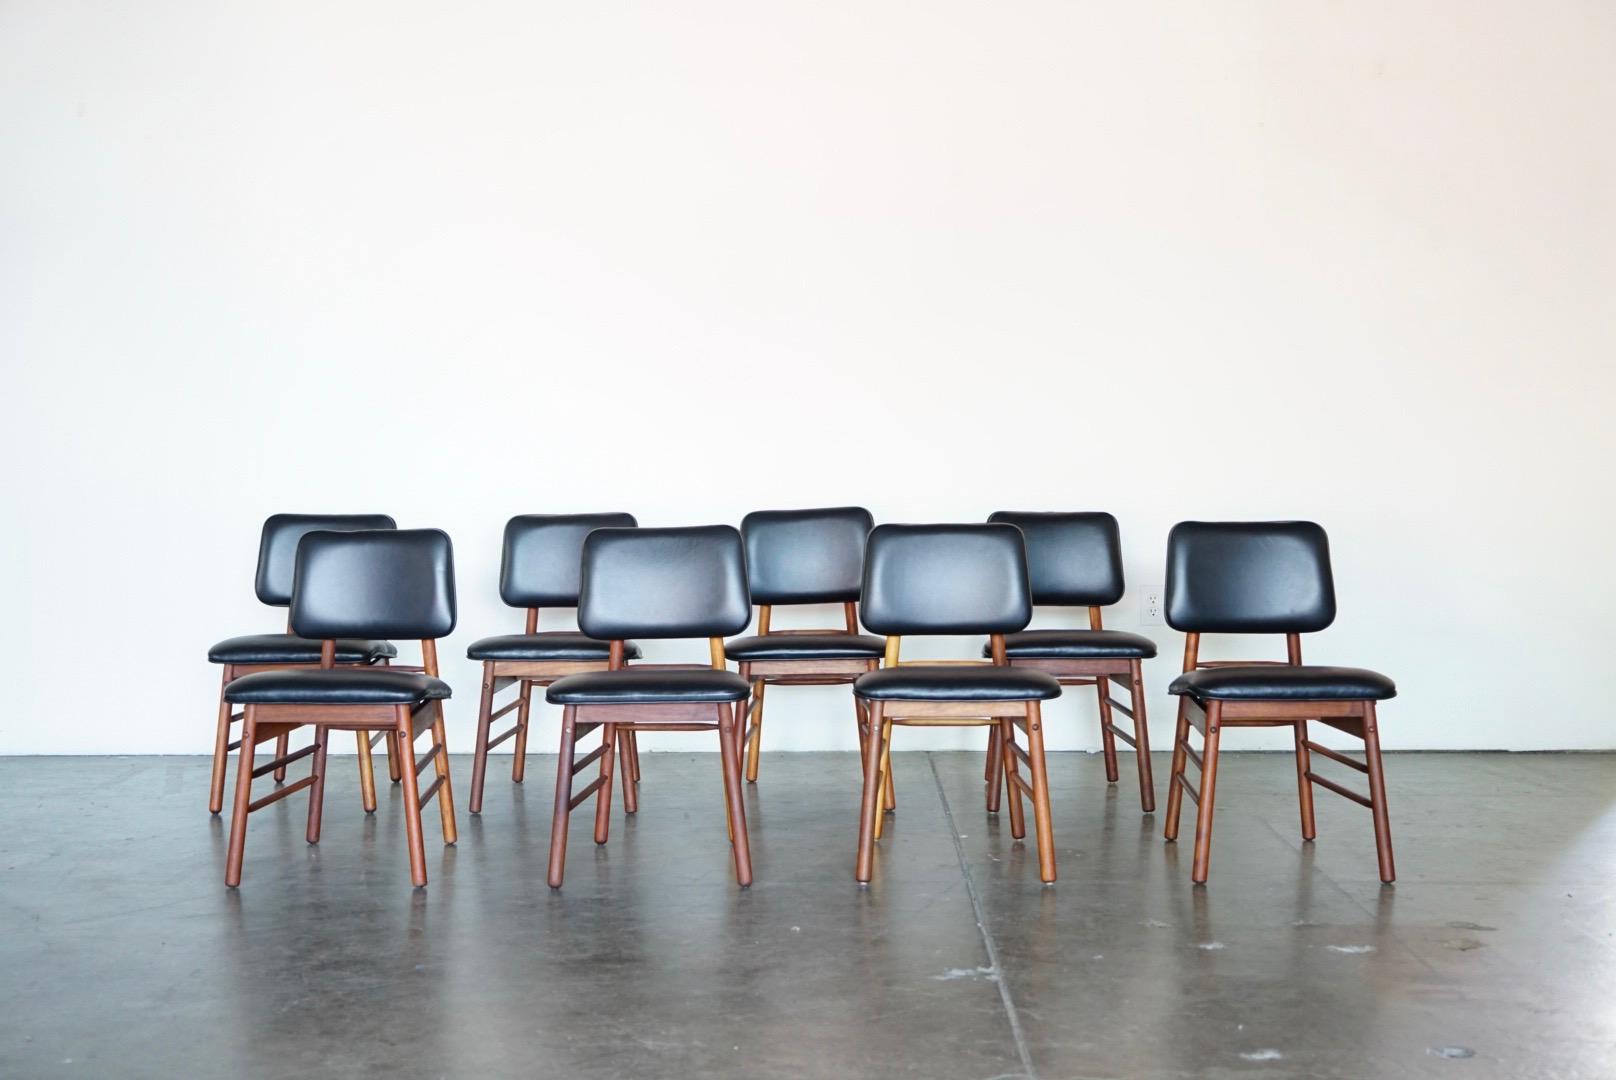 A gorgeous restored set of eight (8) dining chairs by Greta Grossman for Glenn of California. These Model 6260 chairs were designed in 1952 and produced in the early to mid-1950s. We fully restored each chair with high quality luxury black leather